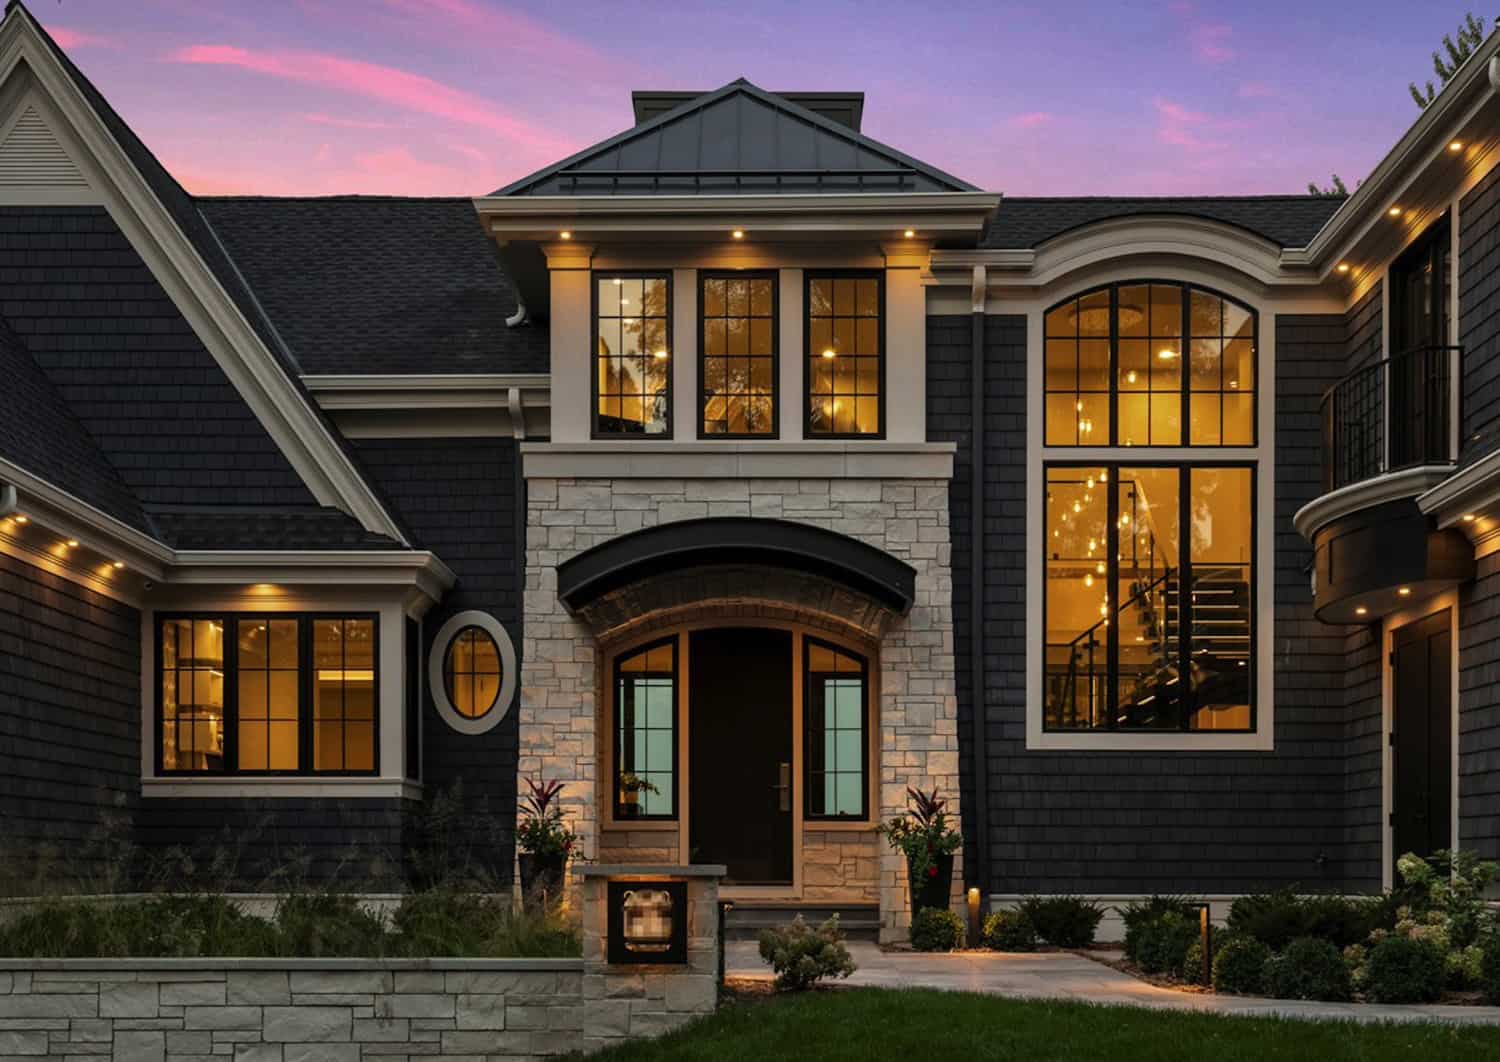 transitional-style-home-exterior-at-dusk